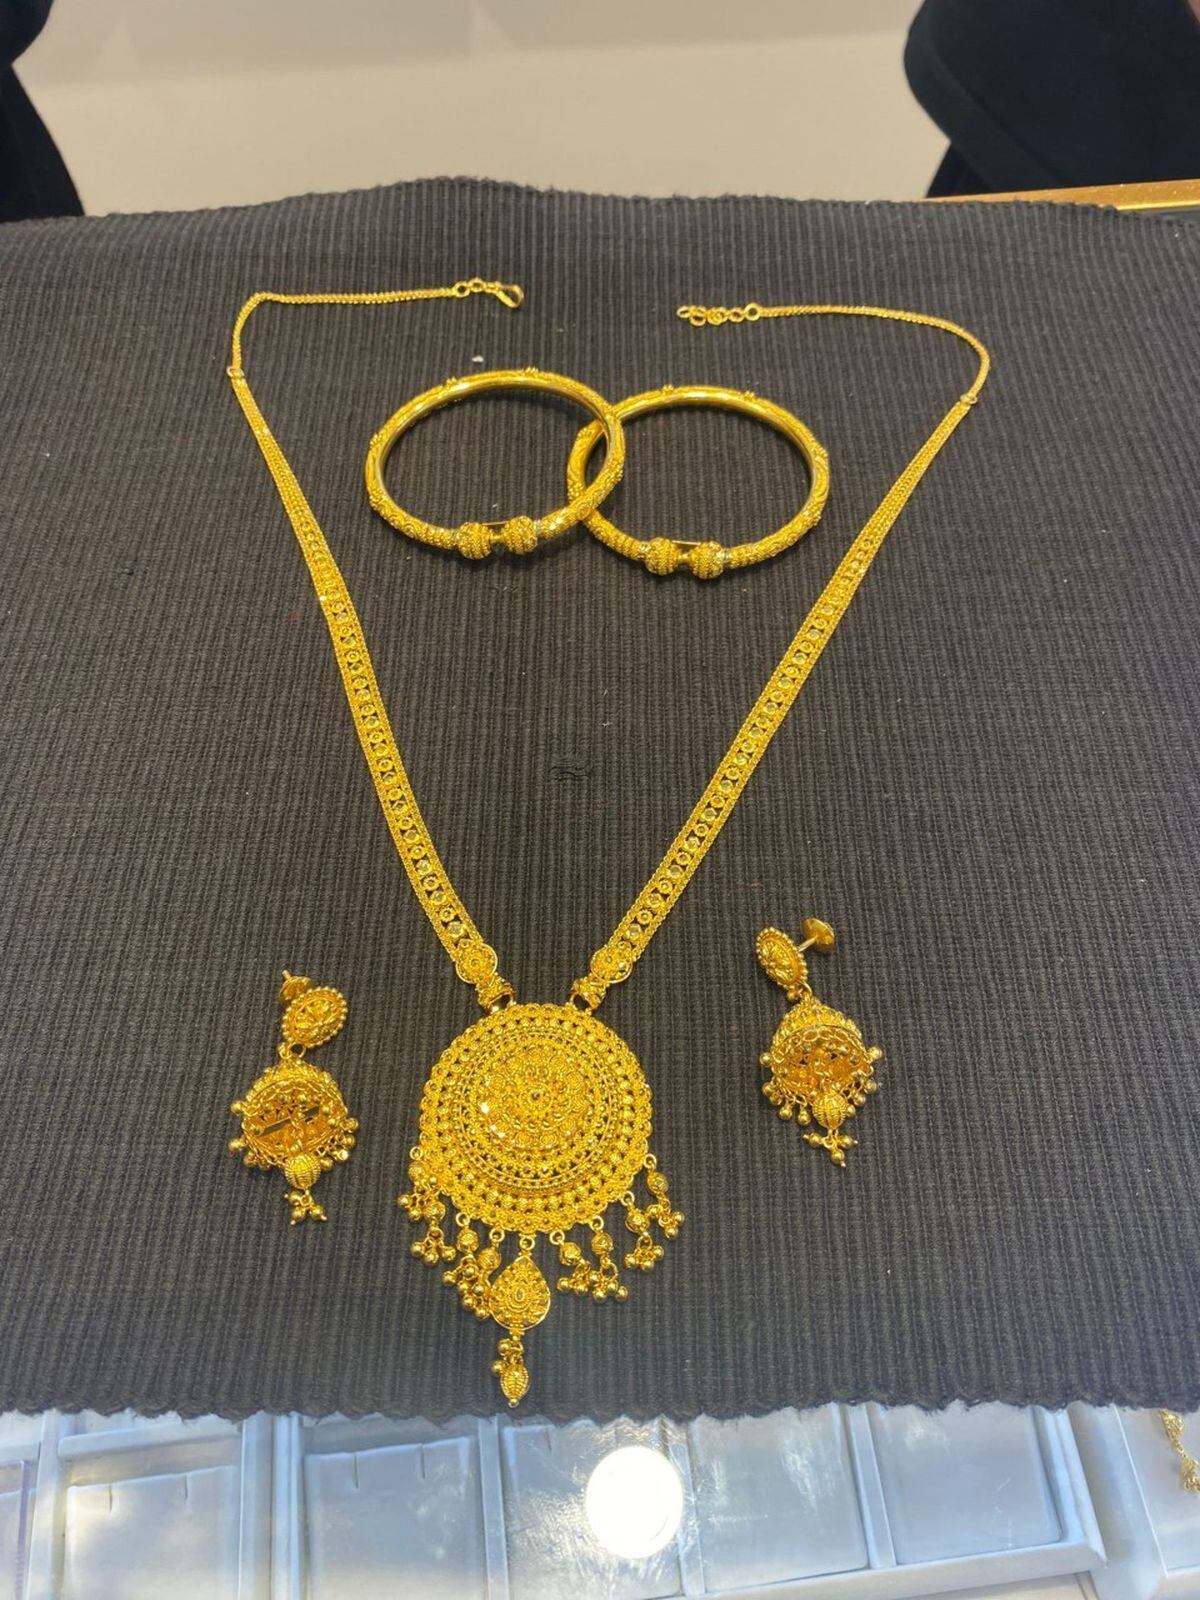 Some of the gold jewellery stolen last week 